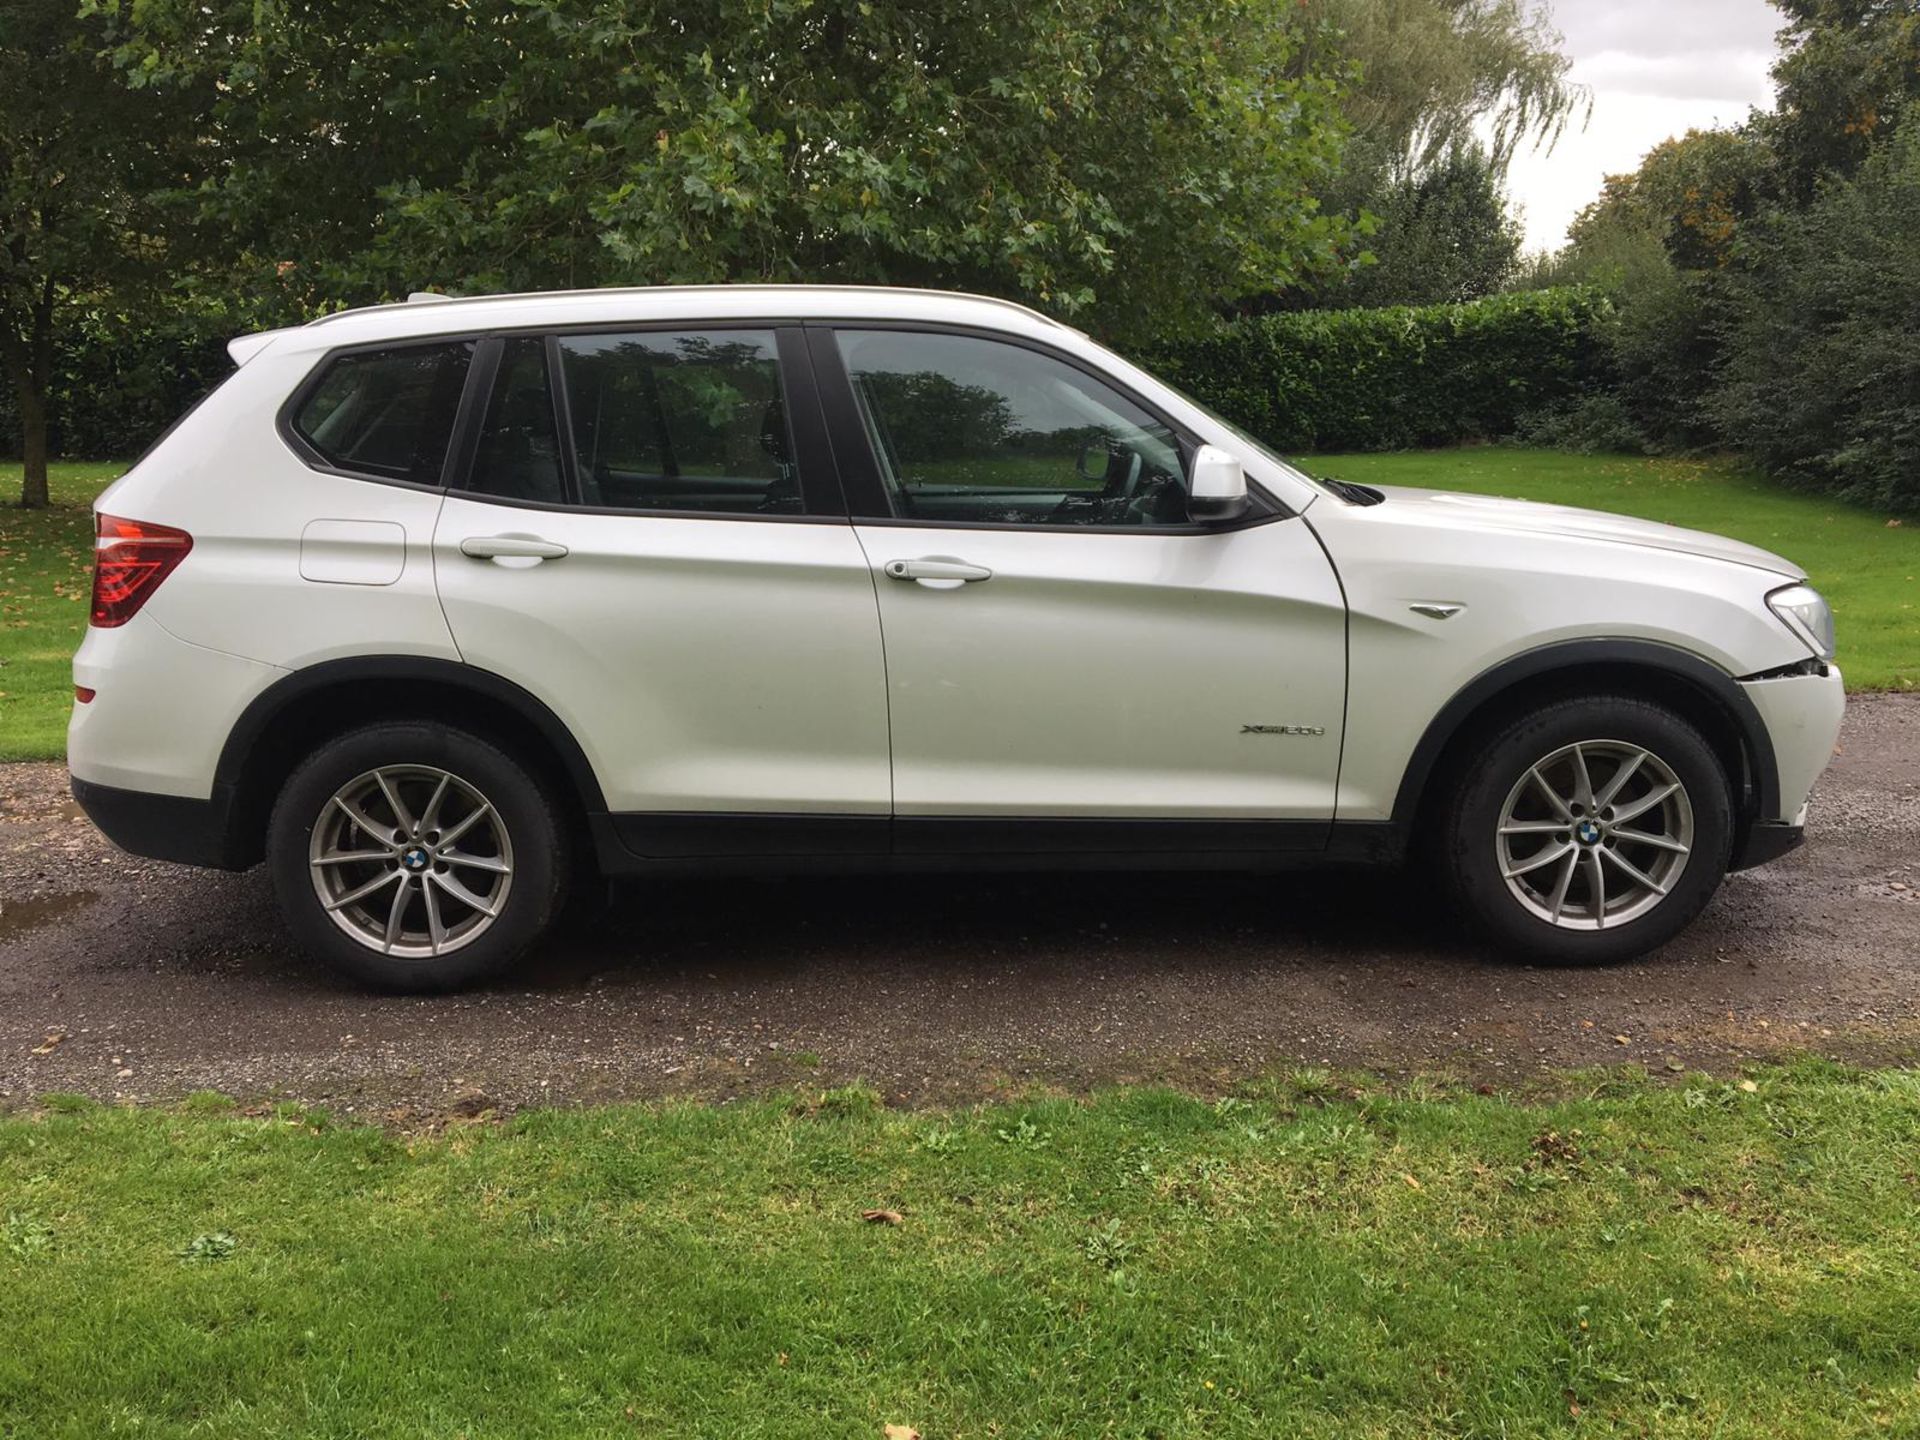 2017/17 REG BMW X3 XDRIVE 20D SE AUTO 2.0 DIESEL WHITE ESTATE, SHOWING 0 FORMER KEEPERS *NO VAT* - Image 8 of 15